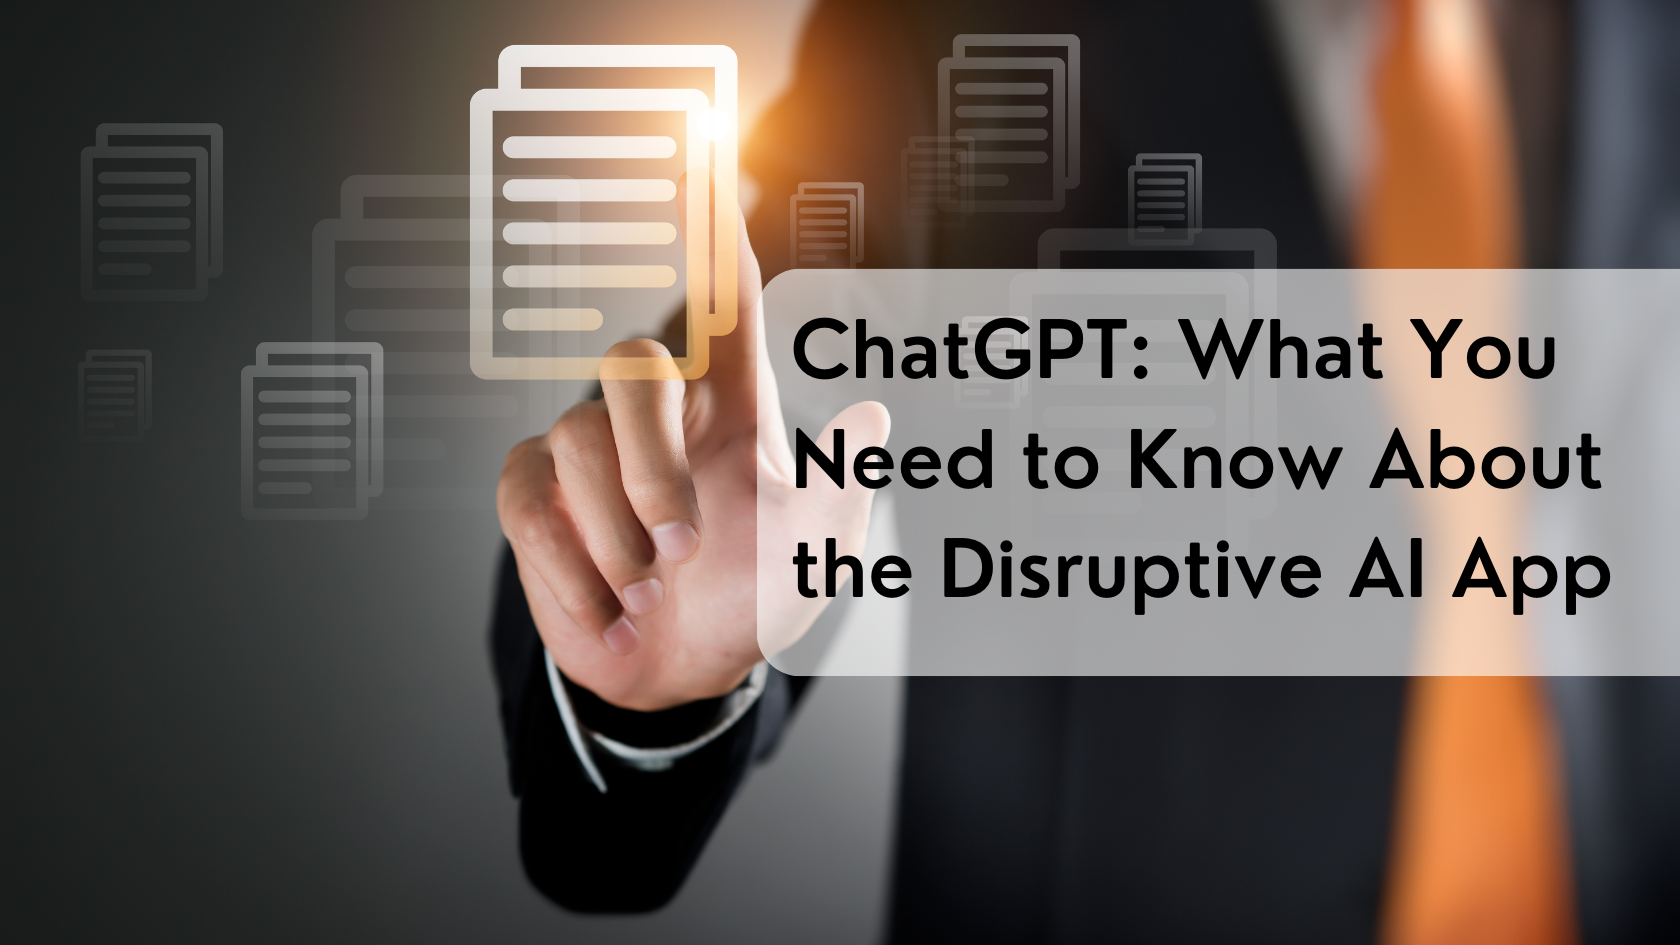 ChatGPT: What You Need to Know About the Disruptive AI App